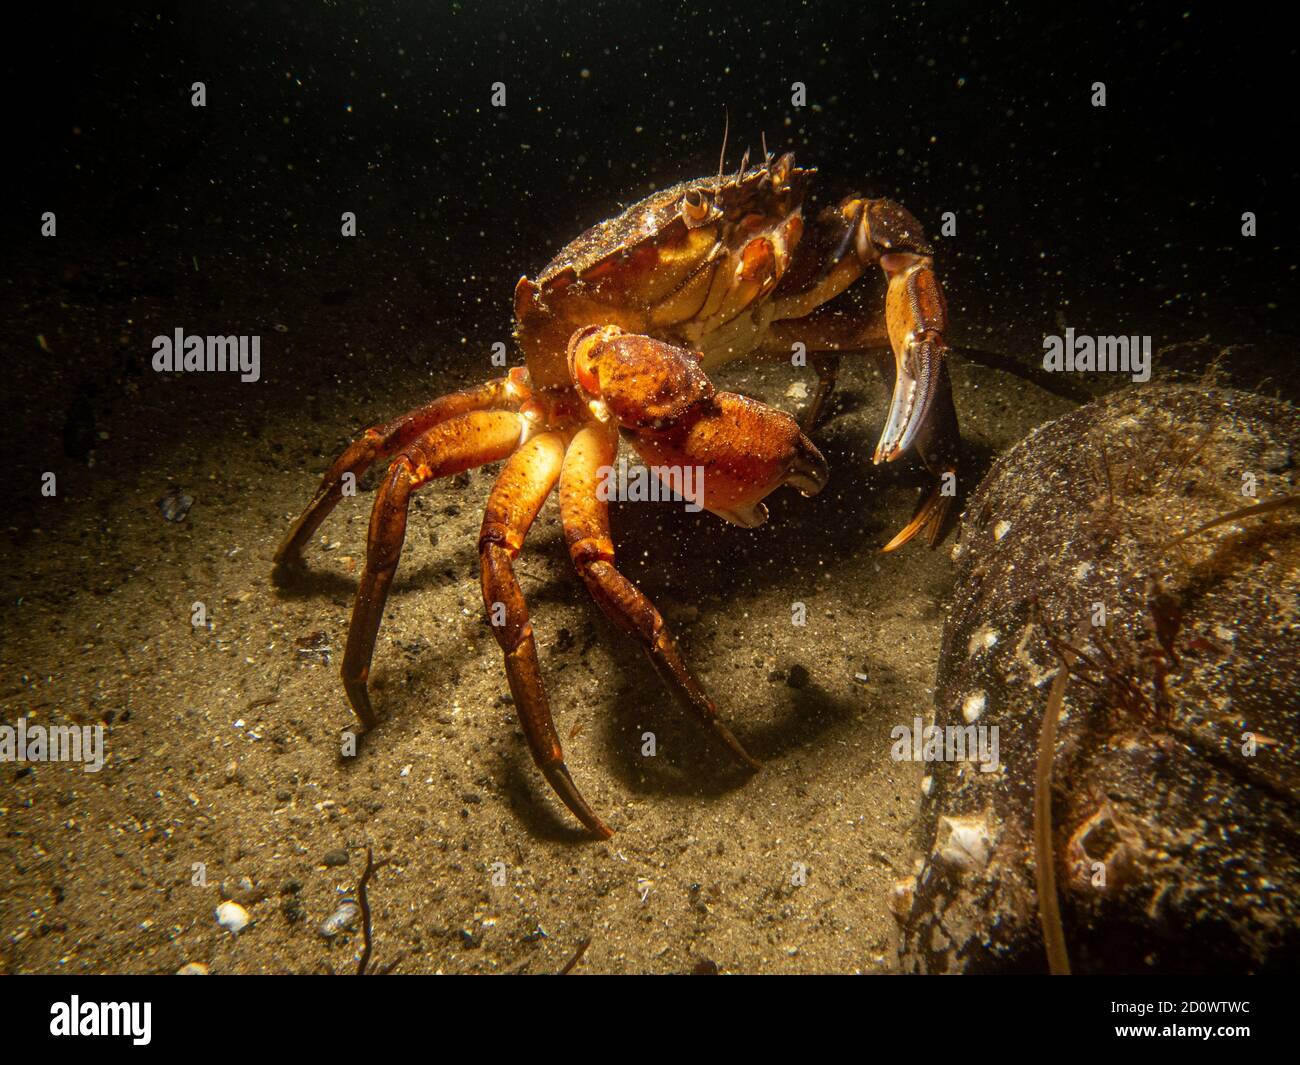 A closeup underwater picture of a crab and a bottle. Picture from Oresund, Malmo in southern Sweden. Stock Photo